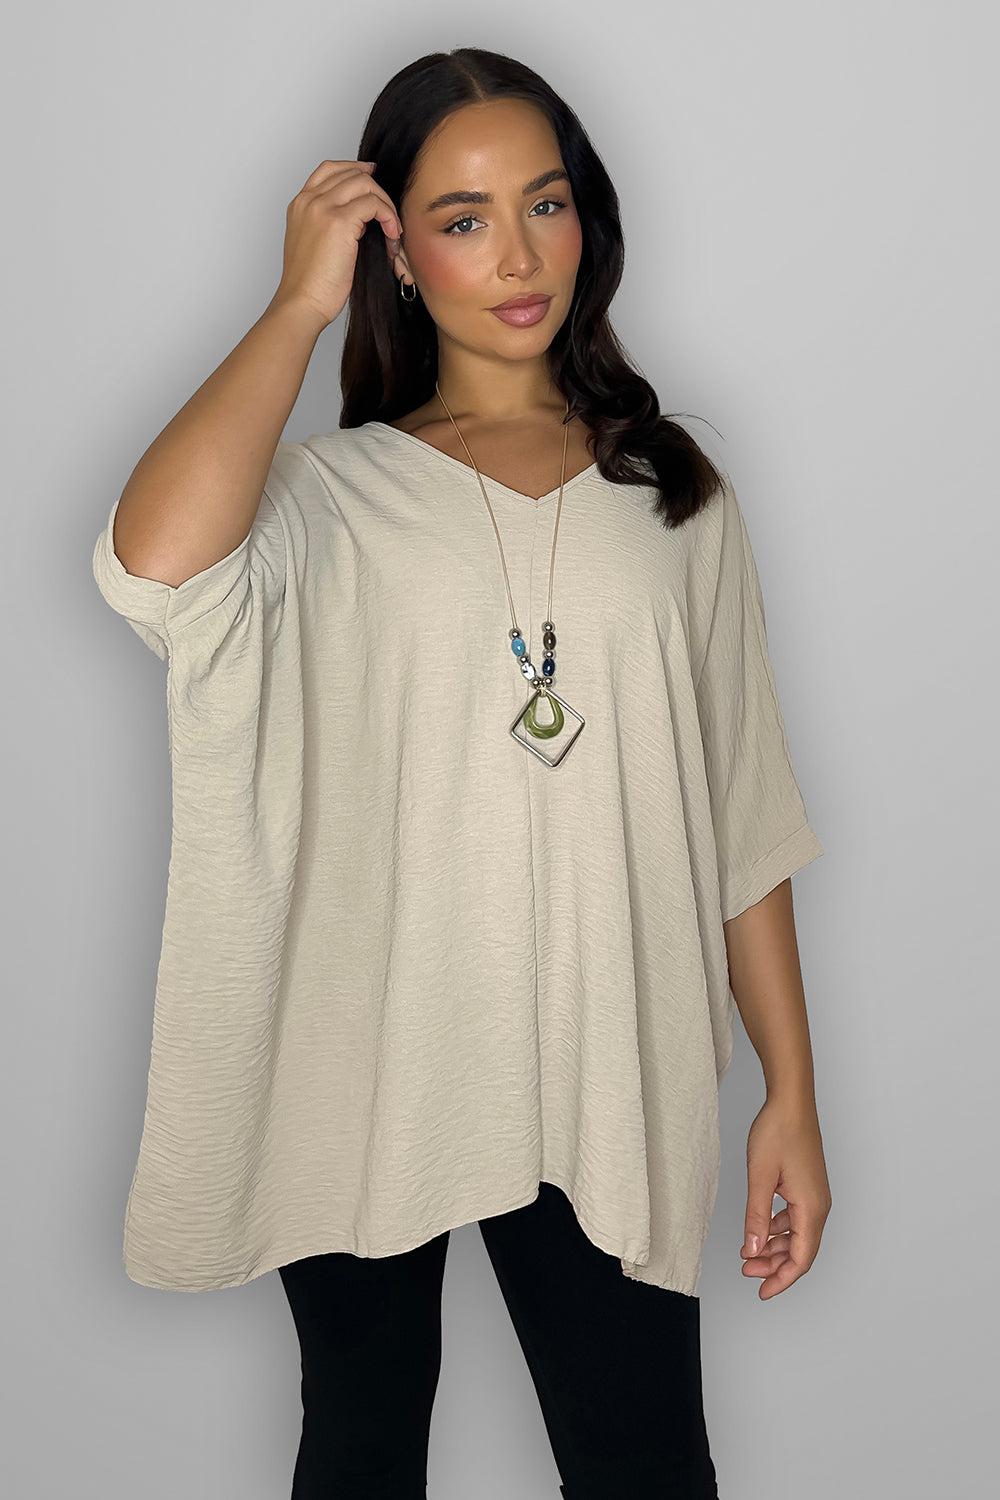 V-Neck Batwing Top And Necklace Set-SinglePrice